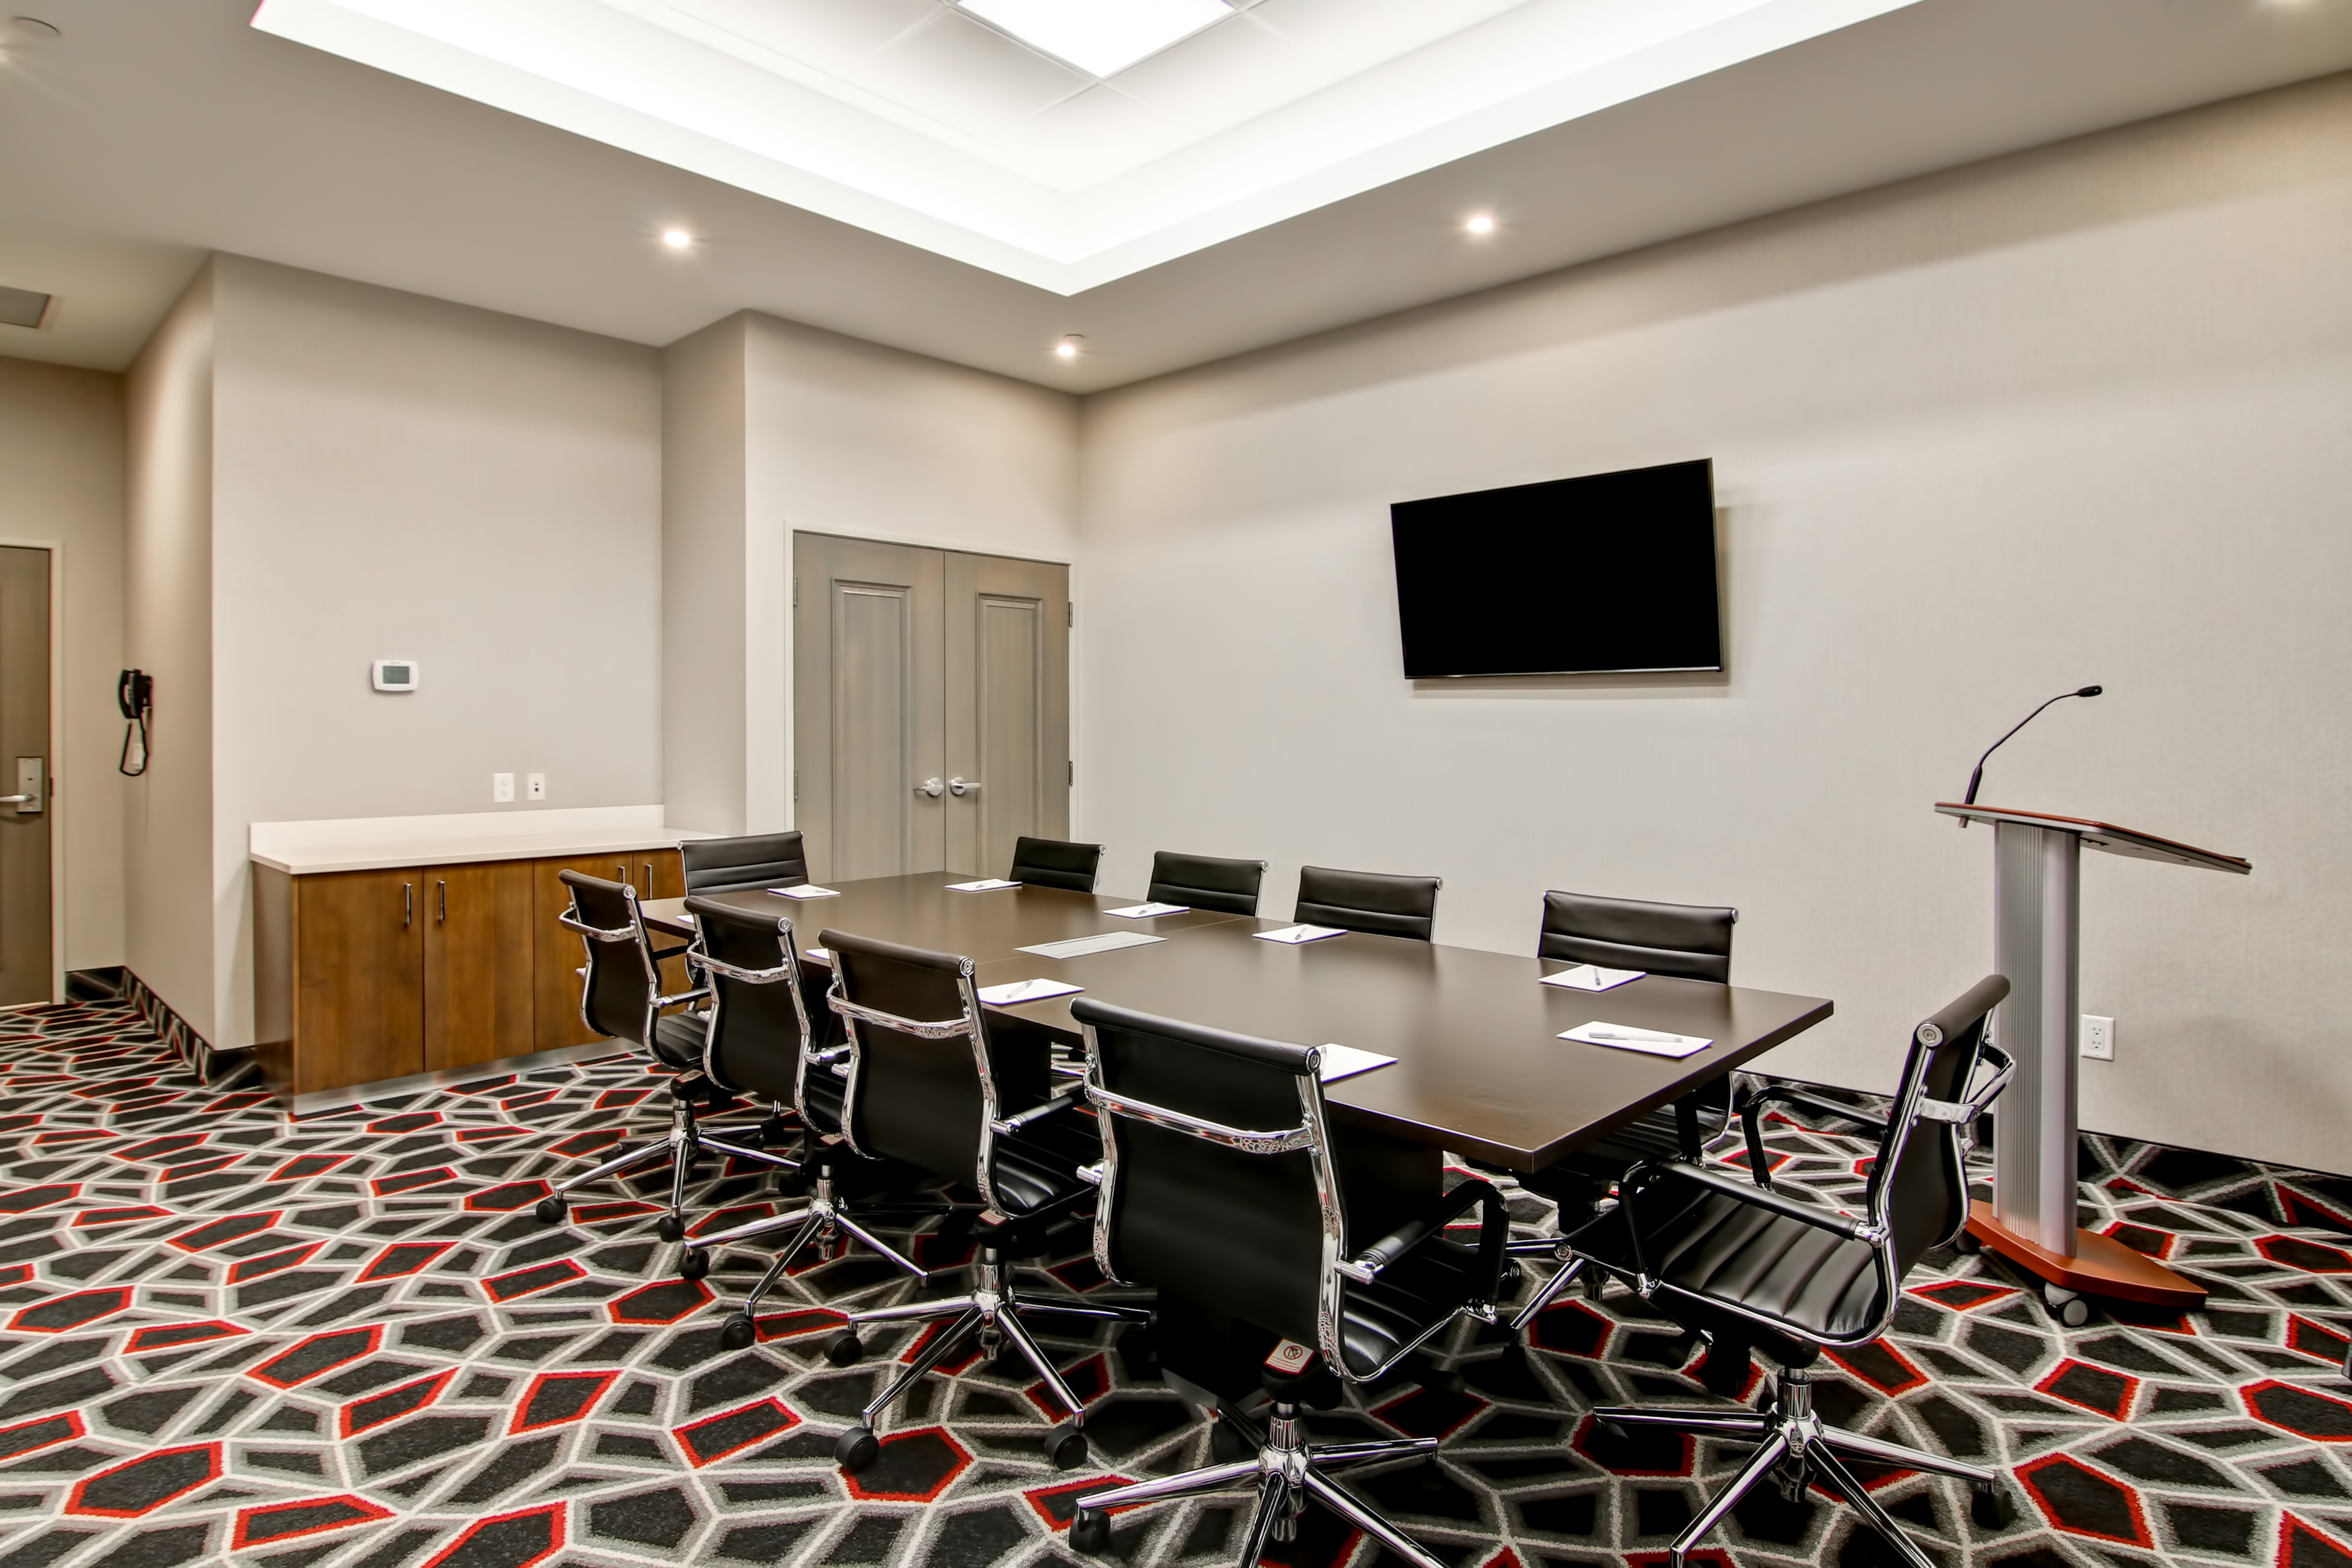 Meeting Room with Meeting Table, Office Chairs, Talker Desk and Wall Mounted HDTV